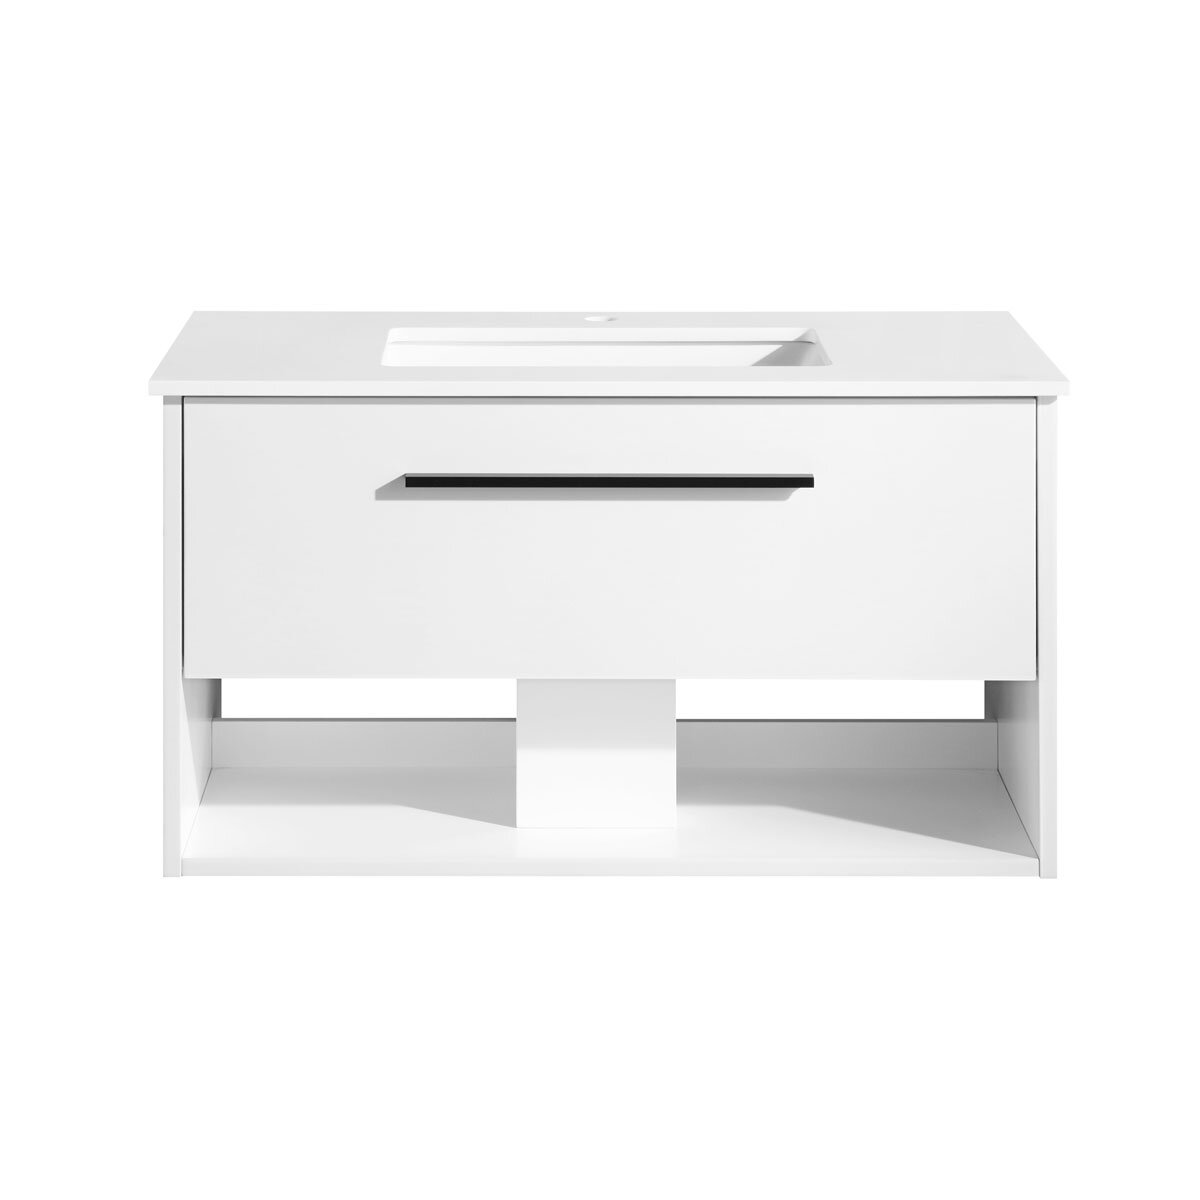 Front facing images of OVE Camila 910mm in matte white on white background